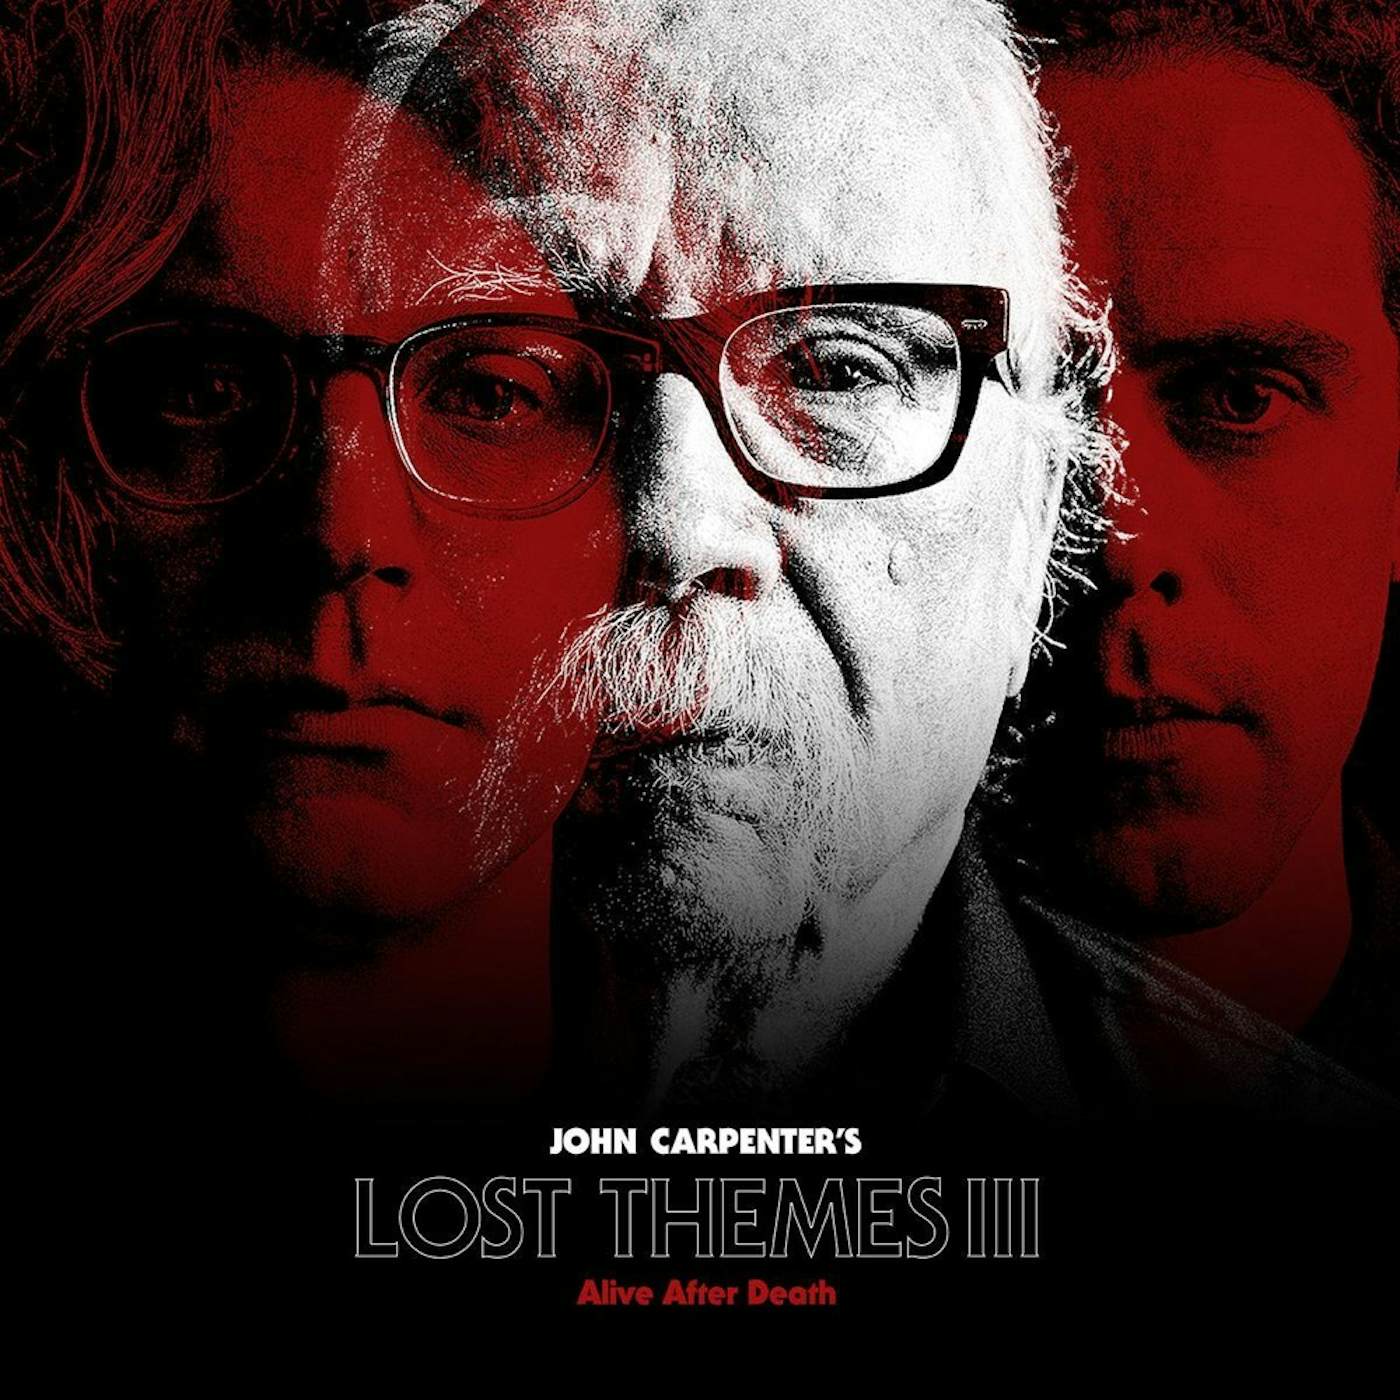 John Carpenter LOST THEME III: ALIVE AFTER DEATH CD